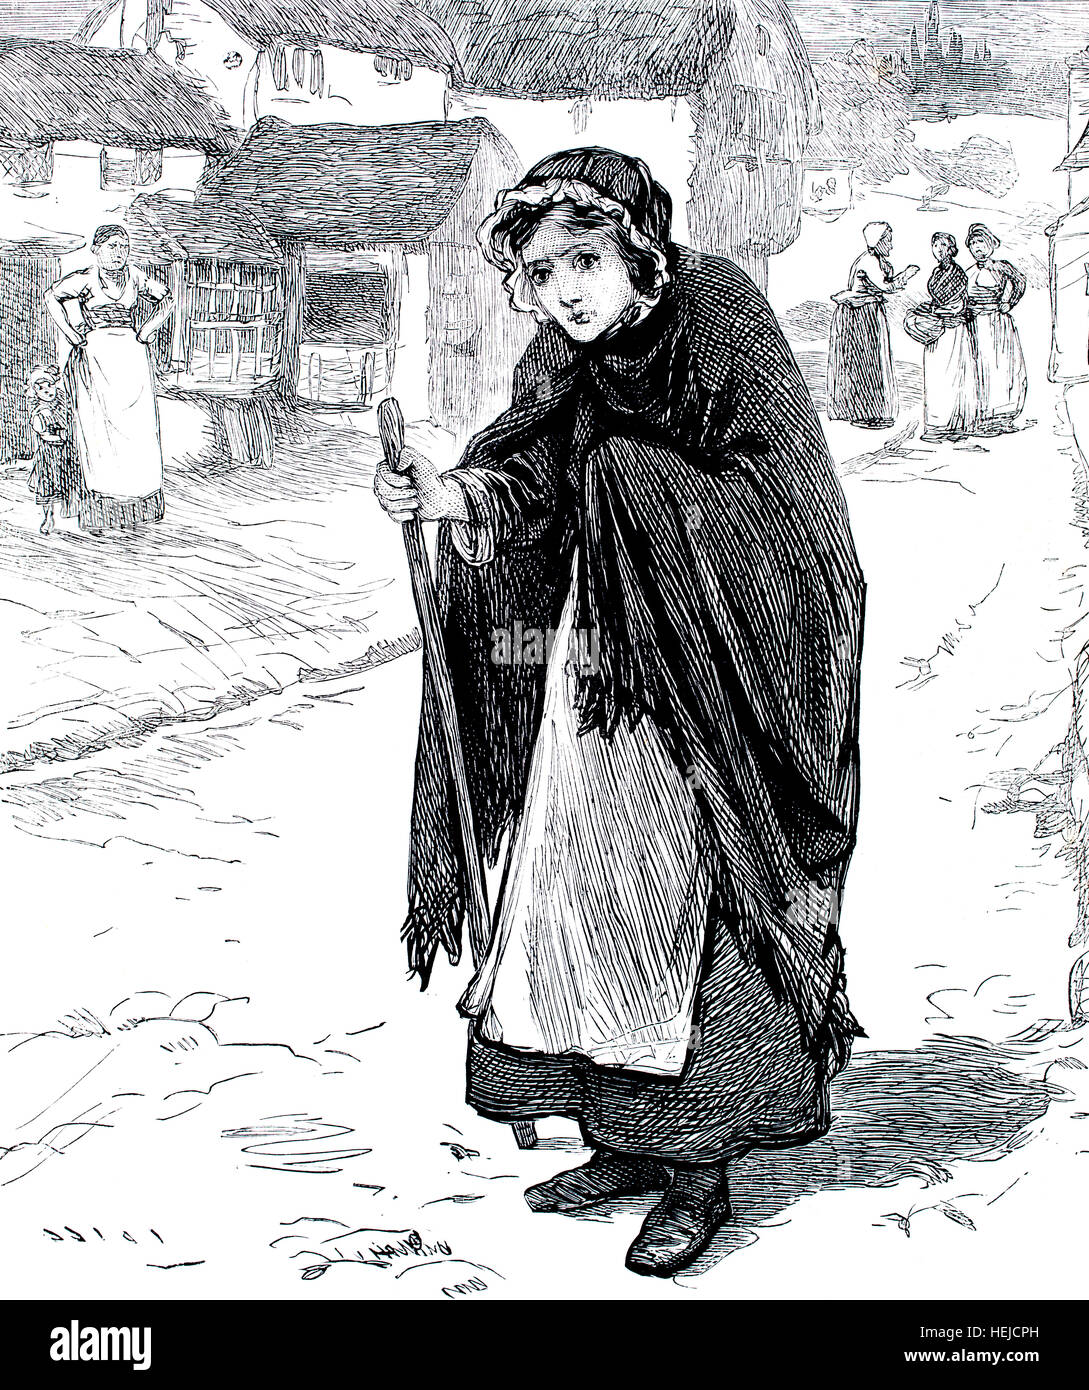 poor-woman-walking-though-victorian-village-illustration-from-1884-HEJCPH.jpg